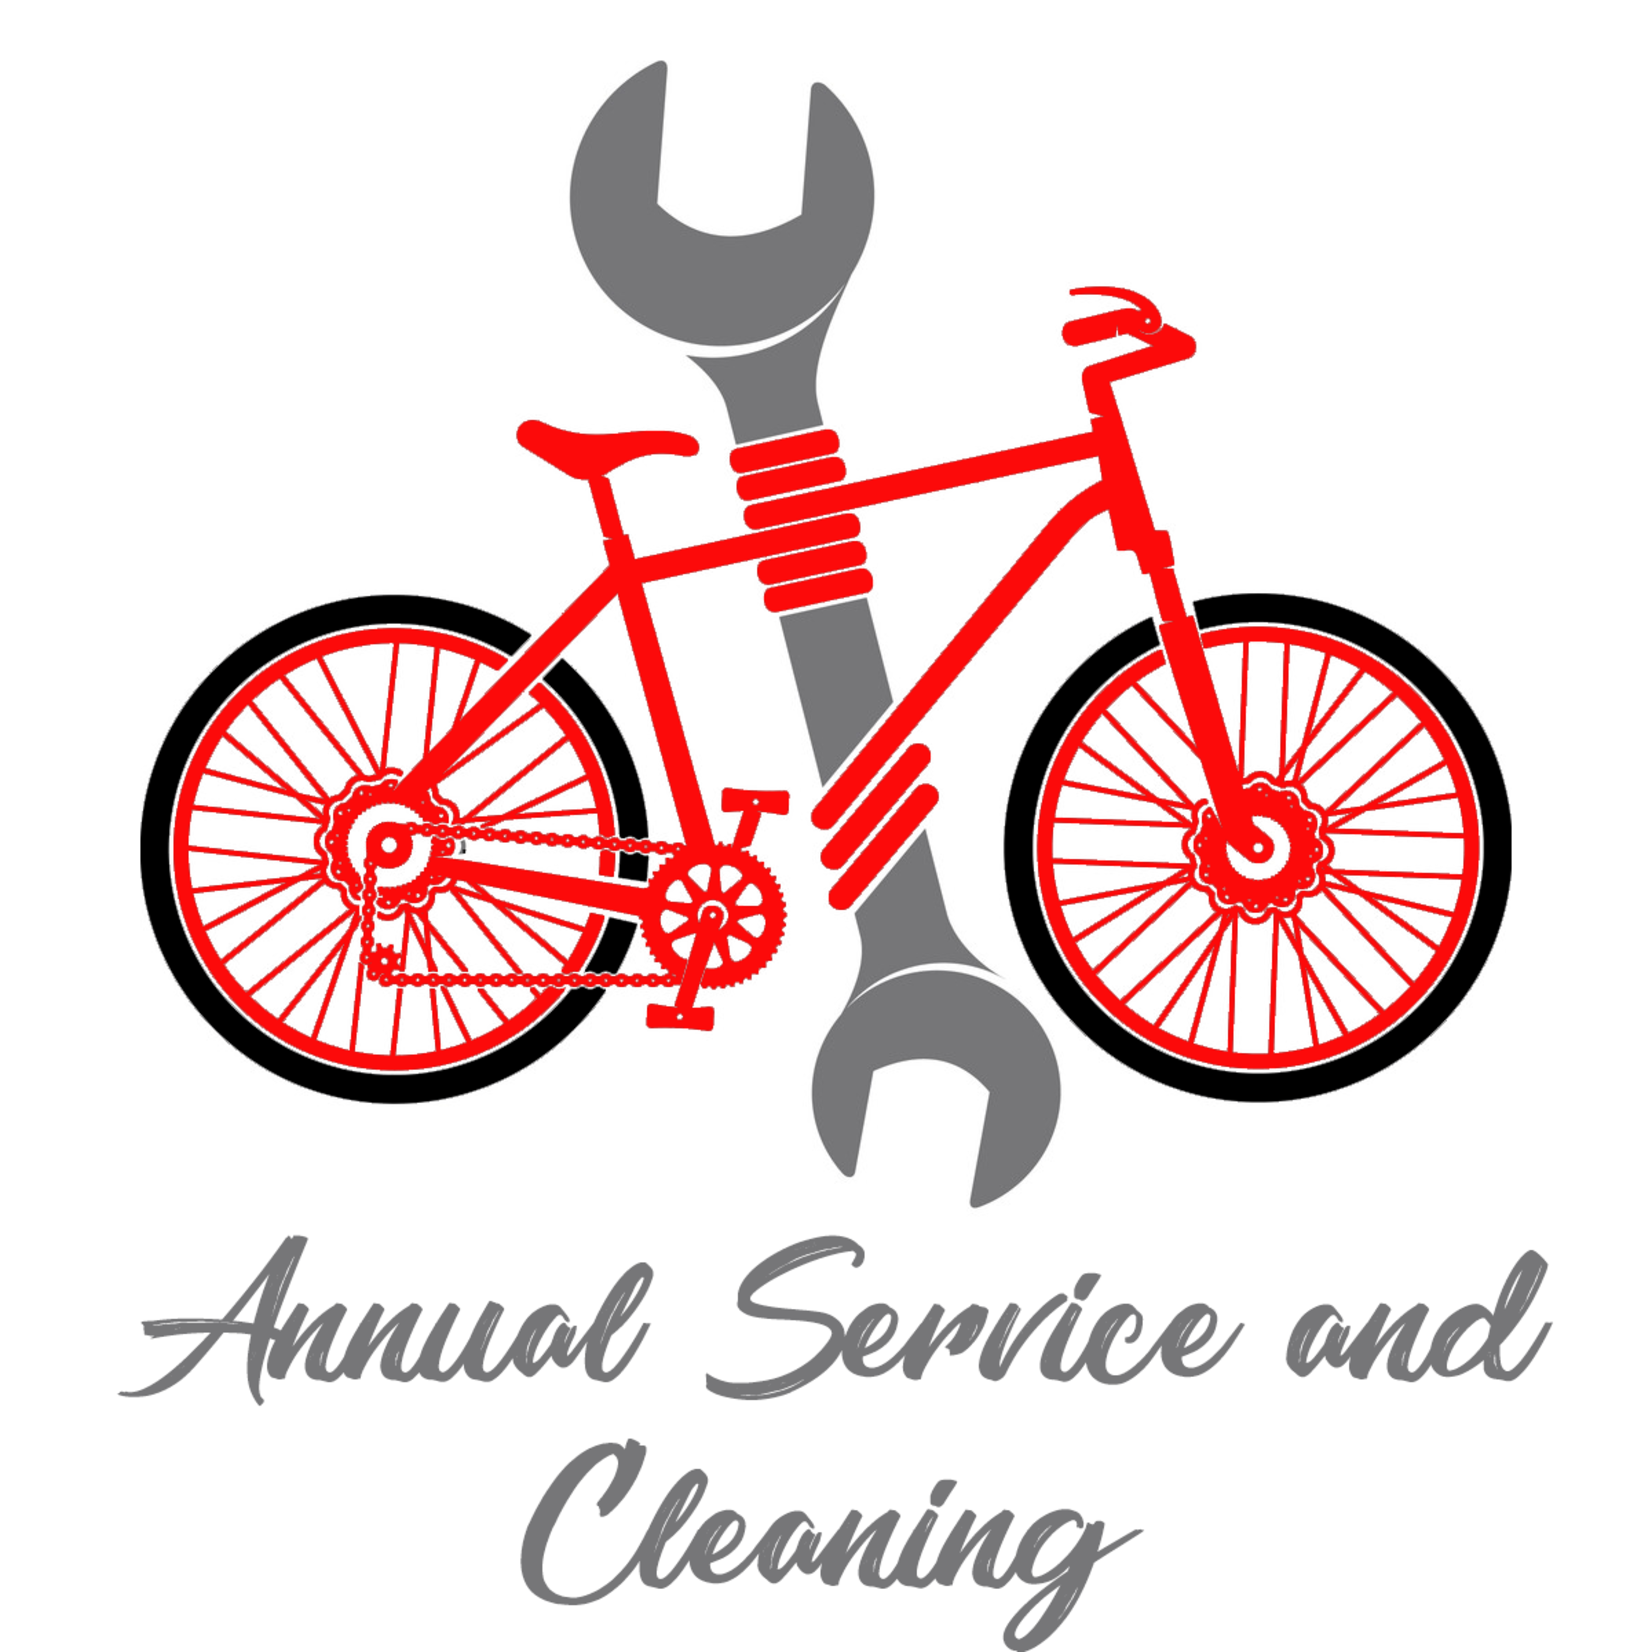 Annual Service and Cleaning